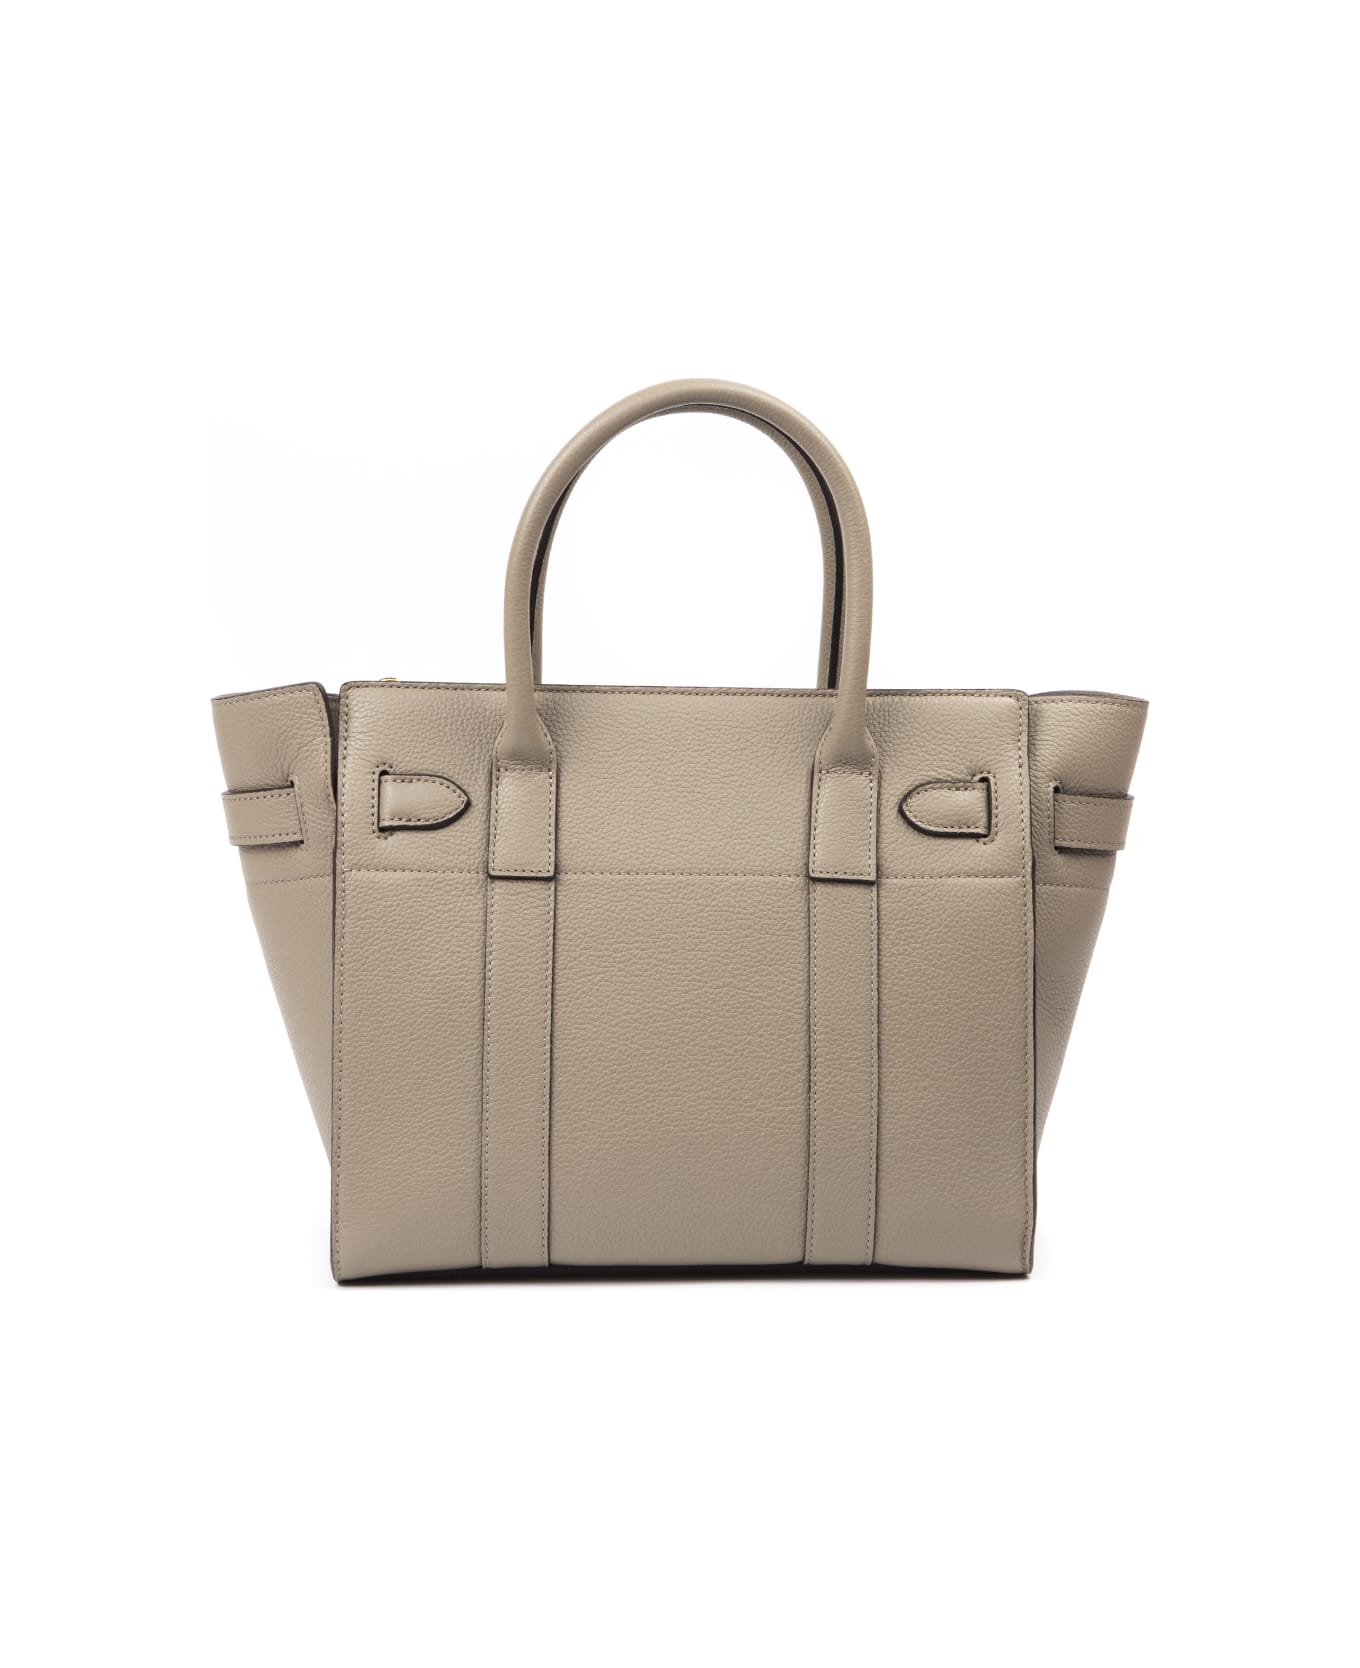 Mulberry Bayswater Solid Grey Leather Tote | italist, ALWAYS LIKE A SALE